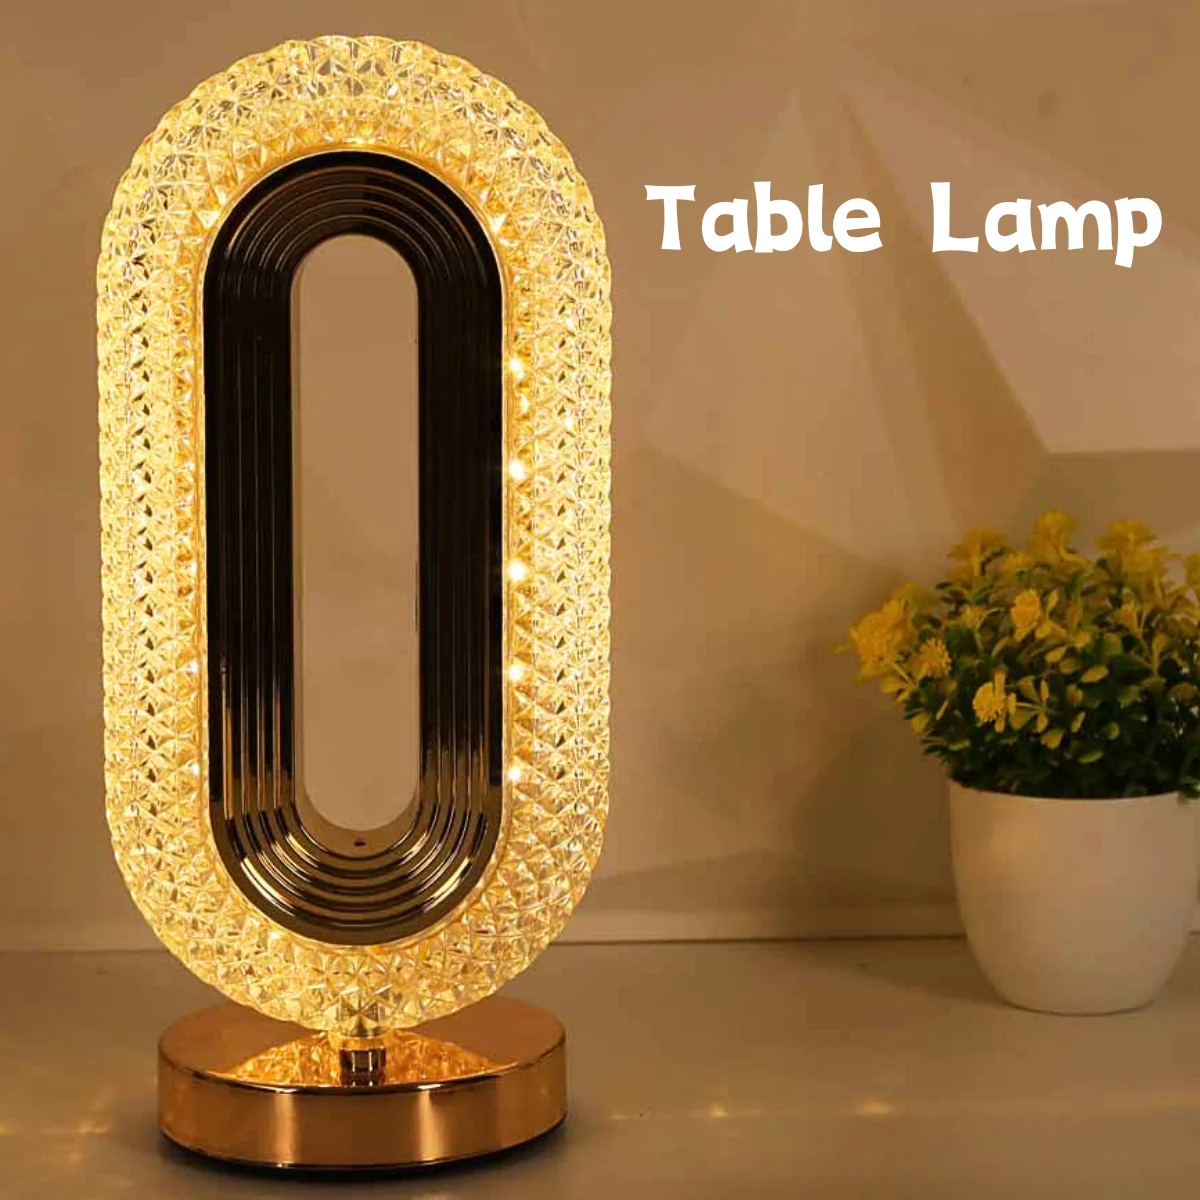 Ble crystal table lamp living room bedroom bedside creative decoration atmosphere night thumb200